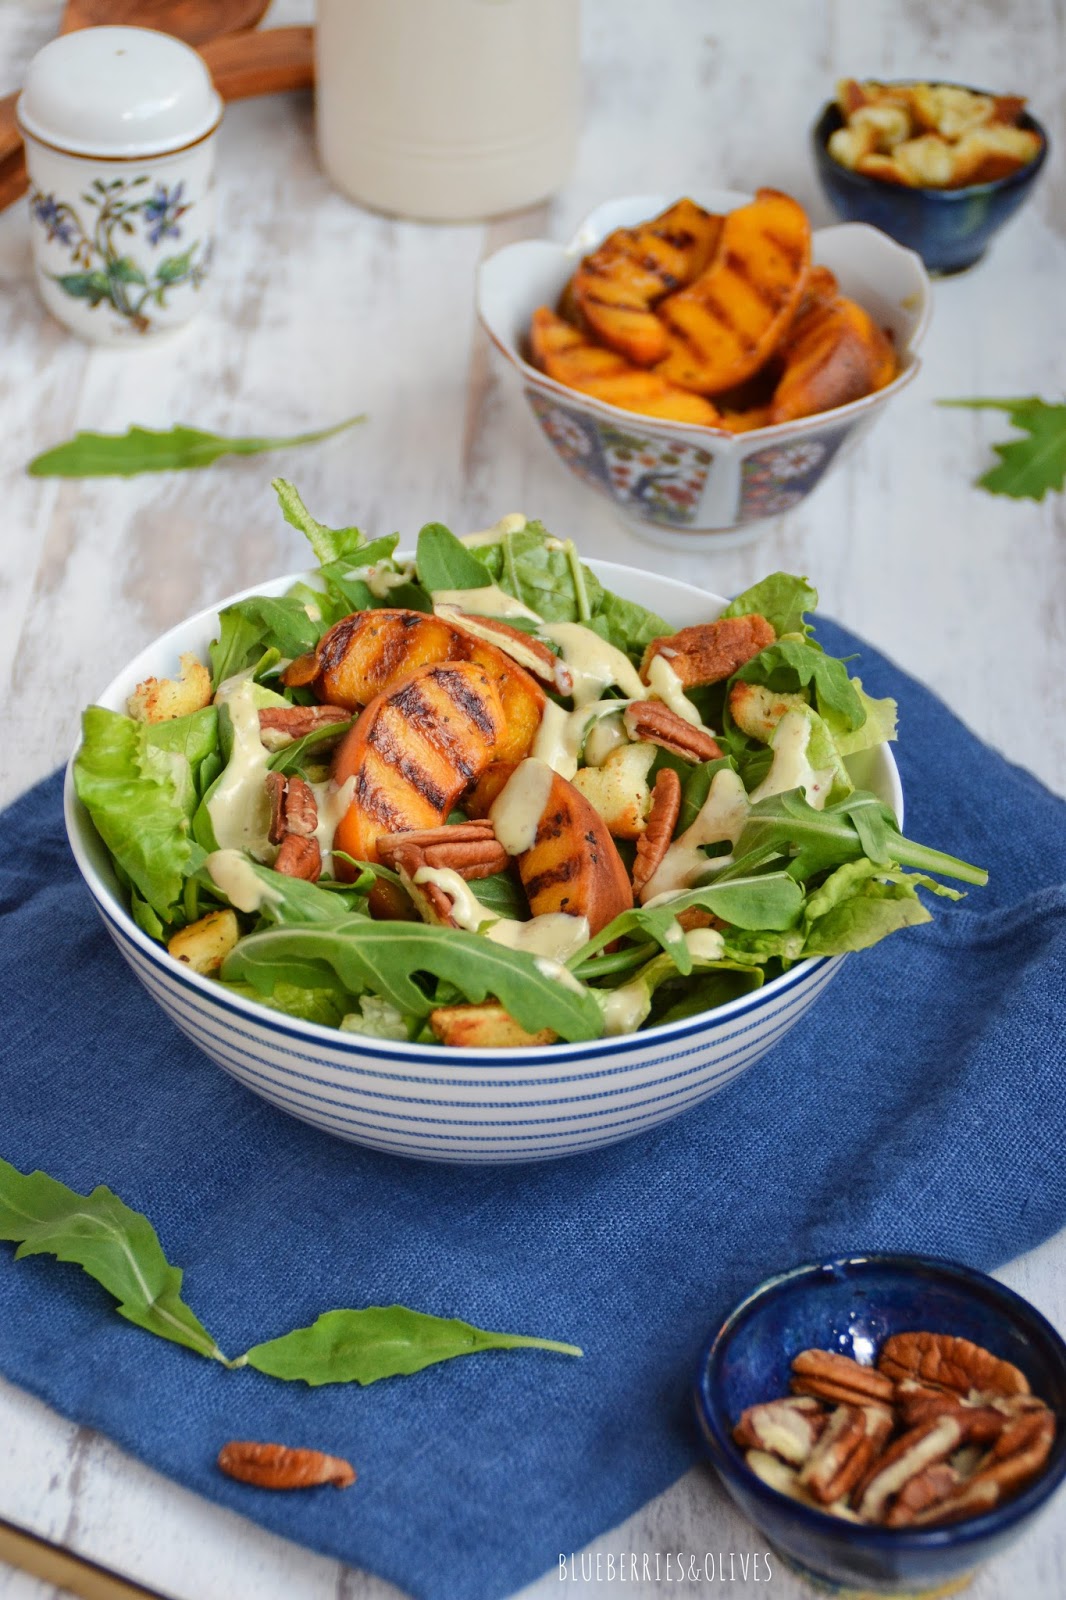 CAESAR SALAD WITH GRILLED PEACHES